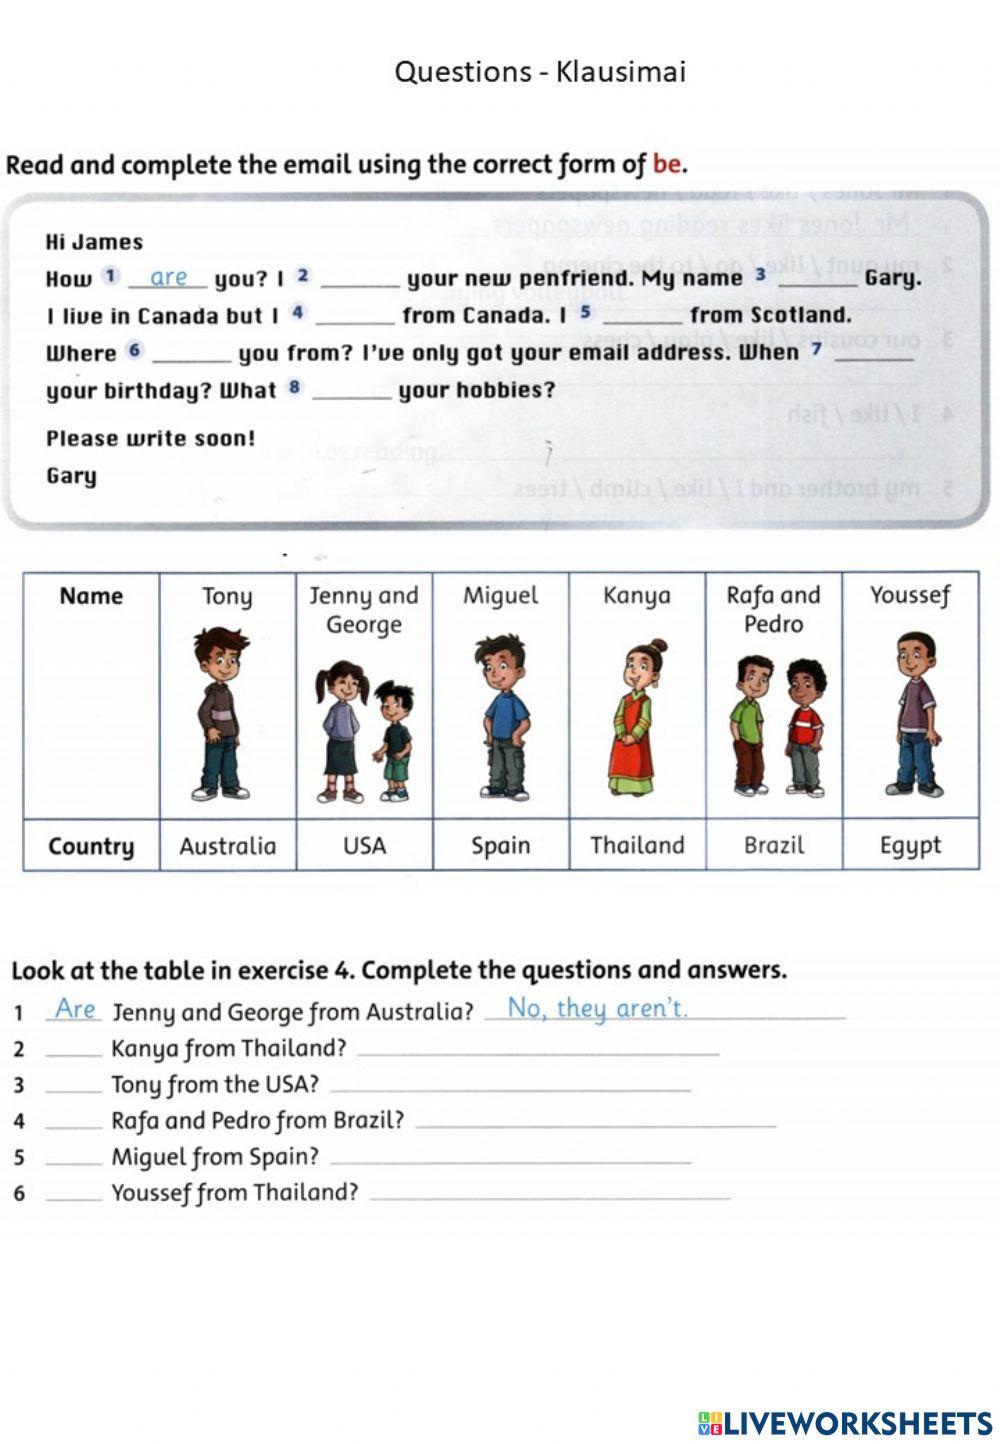 Practica ingles Kids A1 Module 2 online exercise for